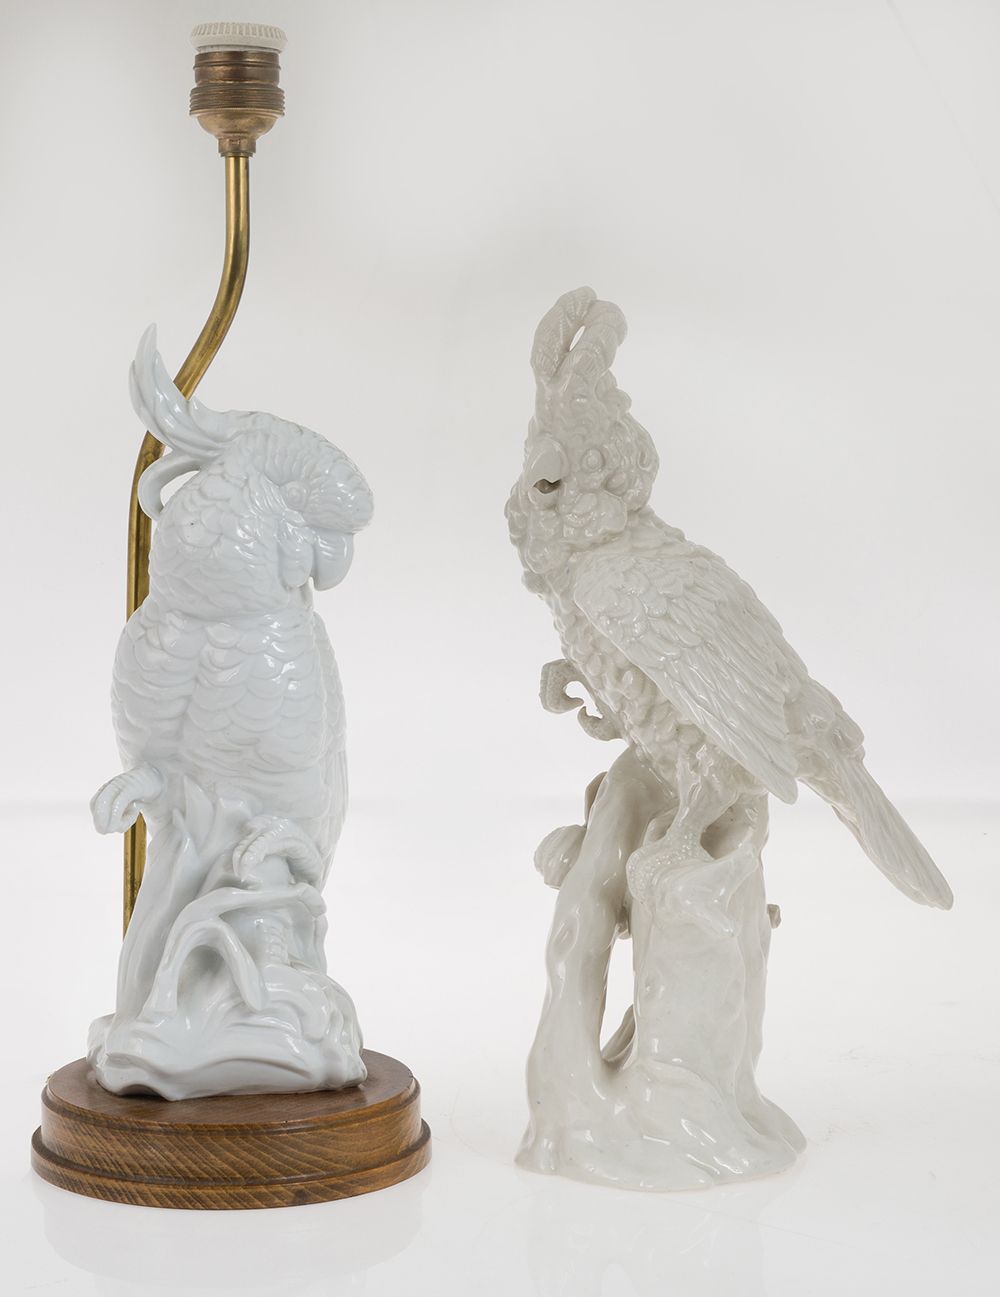 Glazed earthenware table lamp in the shape of a cockatoo med. 20th c. Glazed ear&hellip;